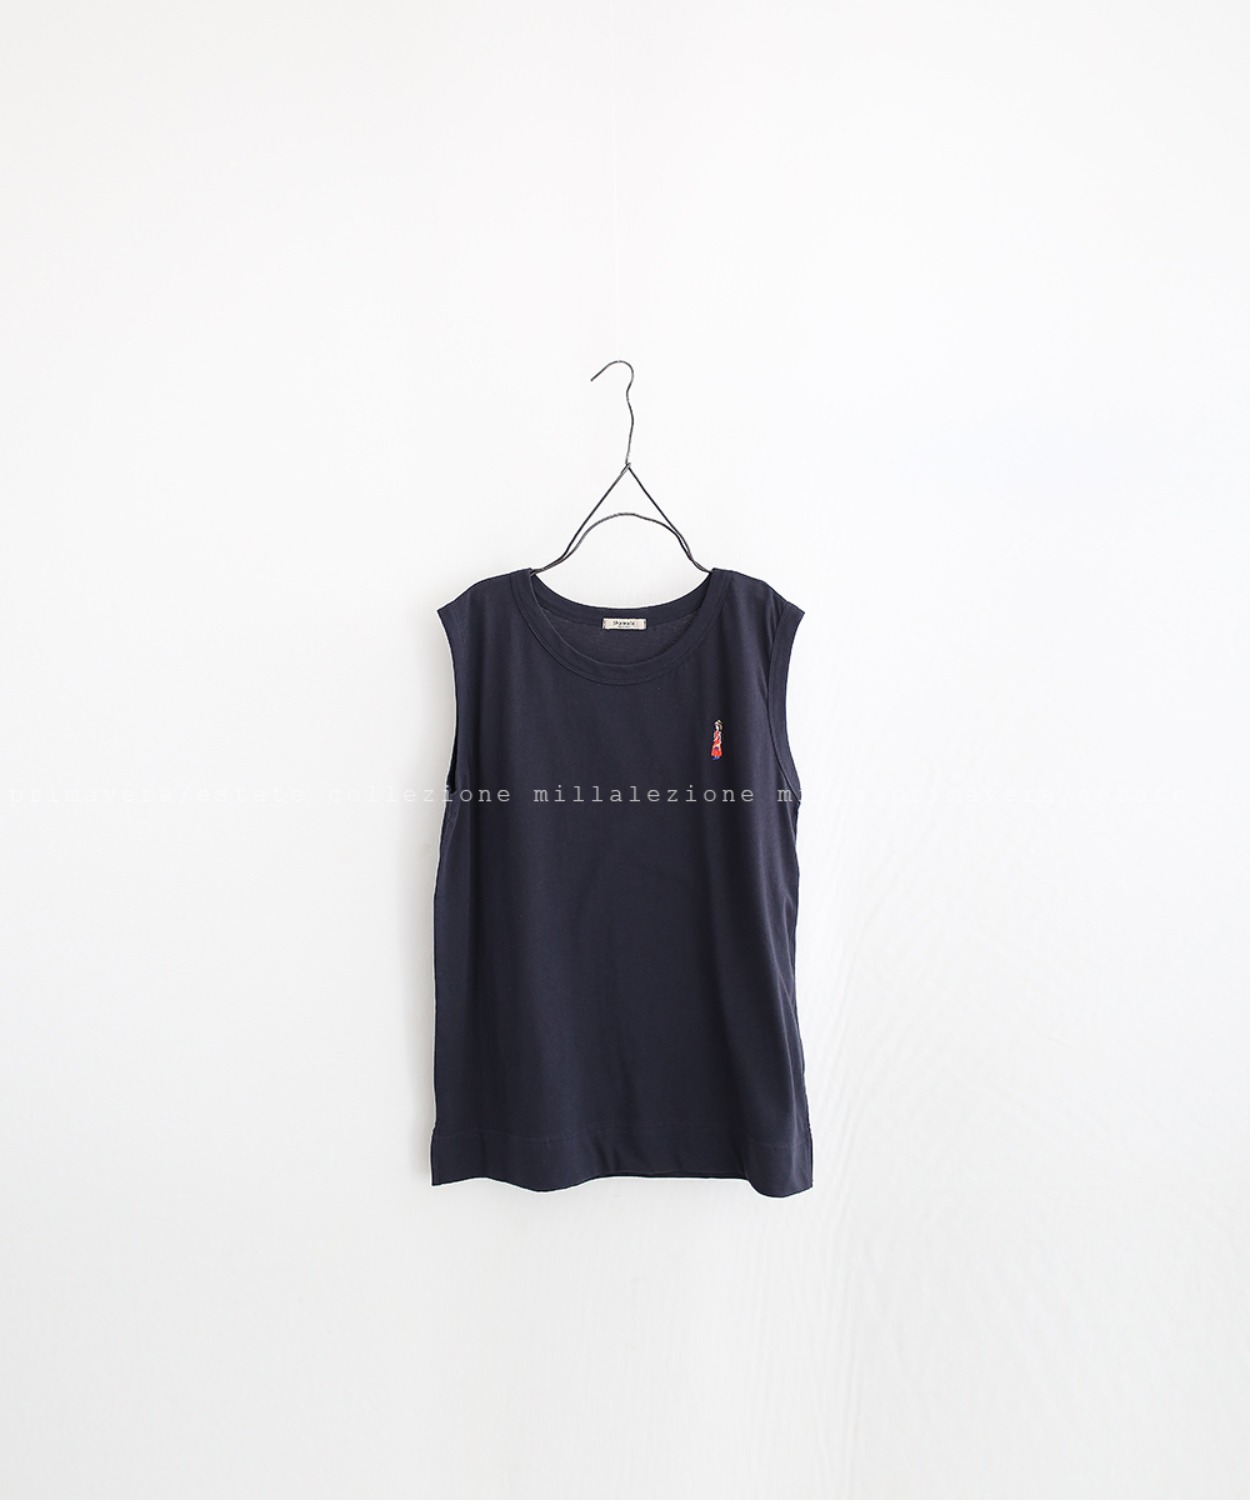 N°046 camisole